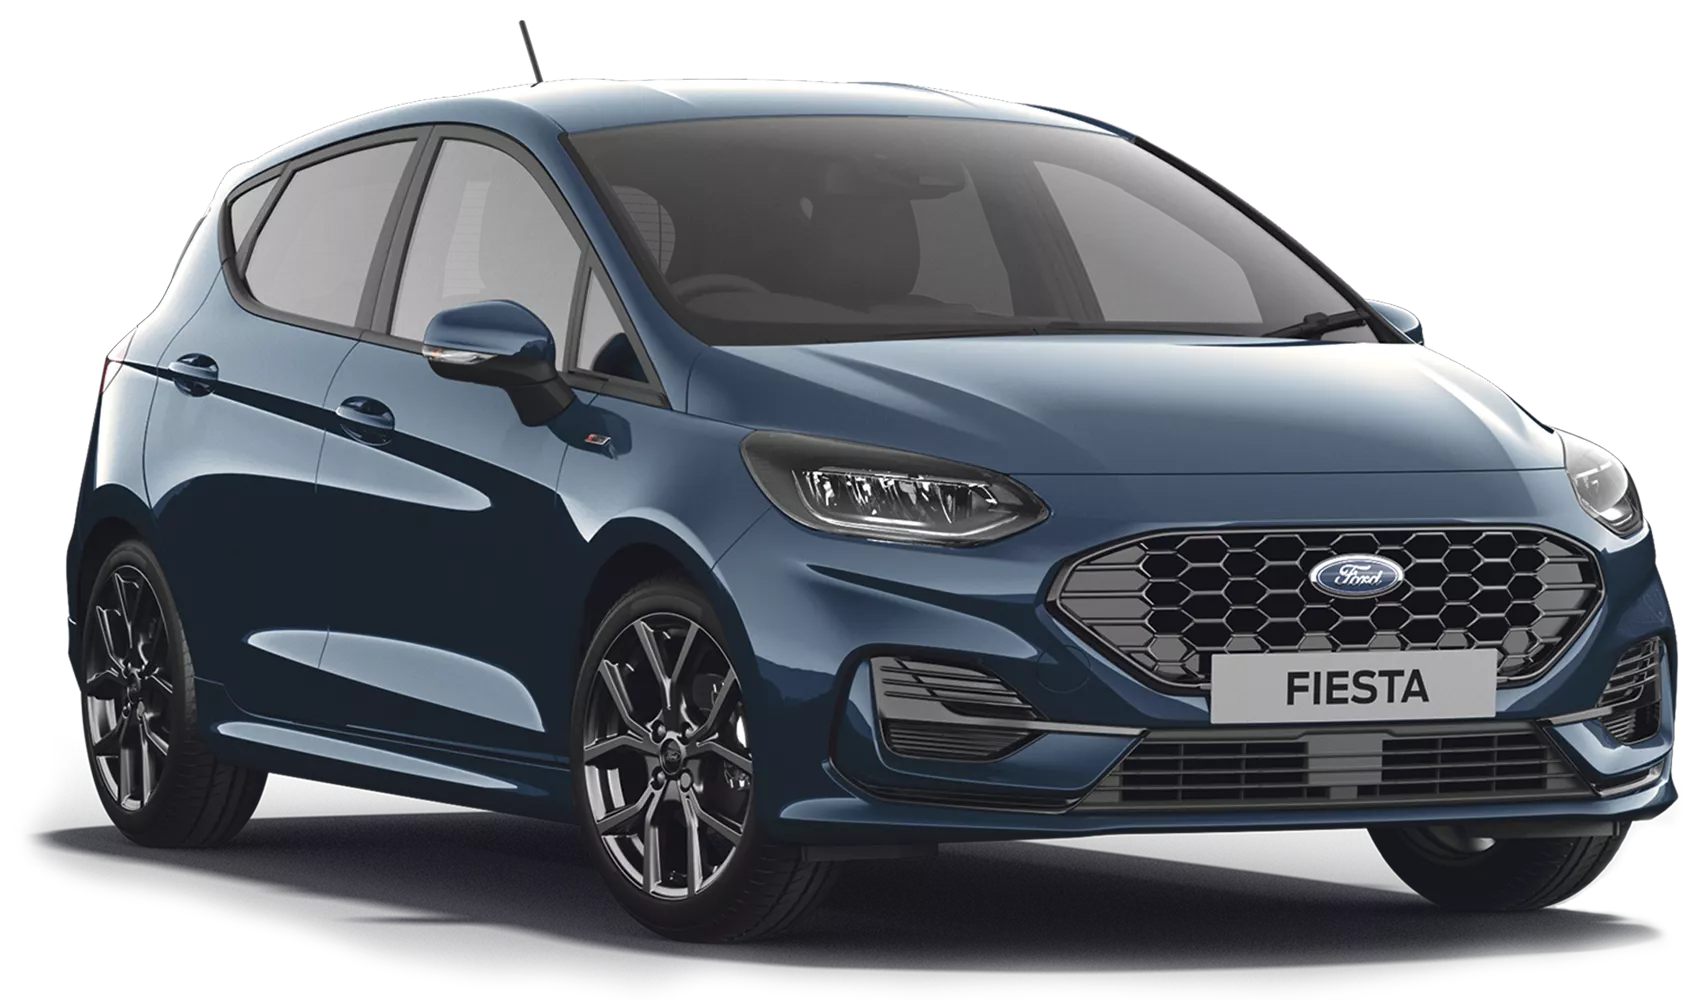 Ford Fiesta 1.0 EcoBoost Hbd mHEV 125 Active X 5dr Auto